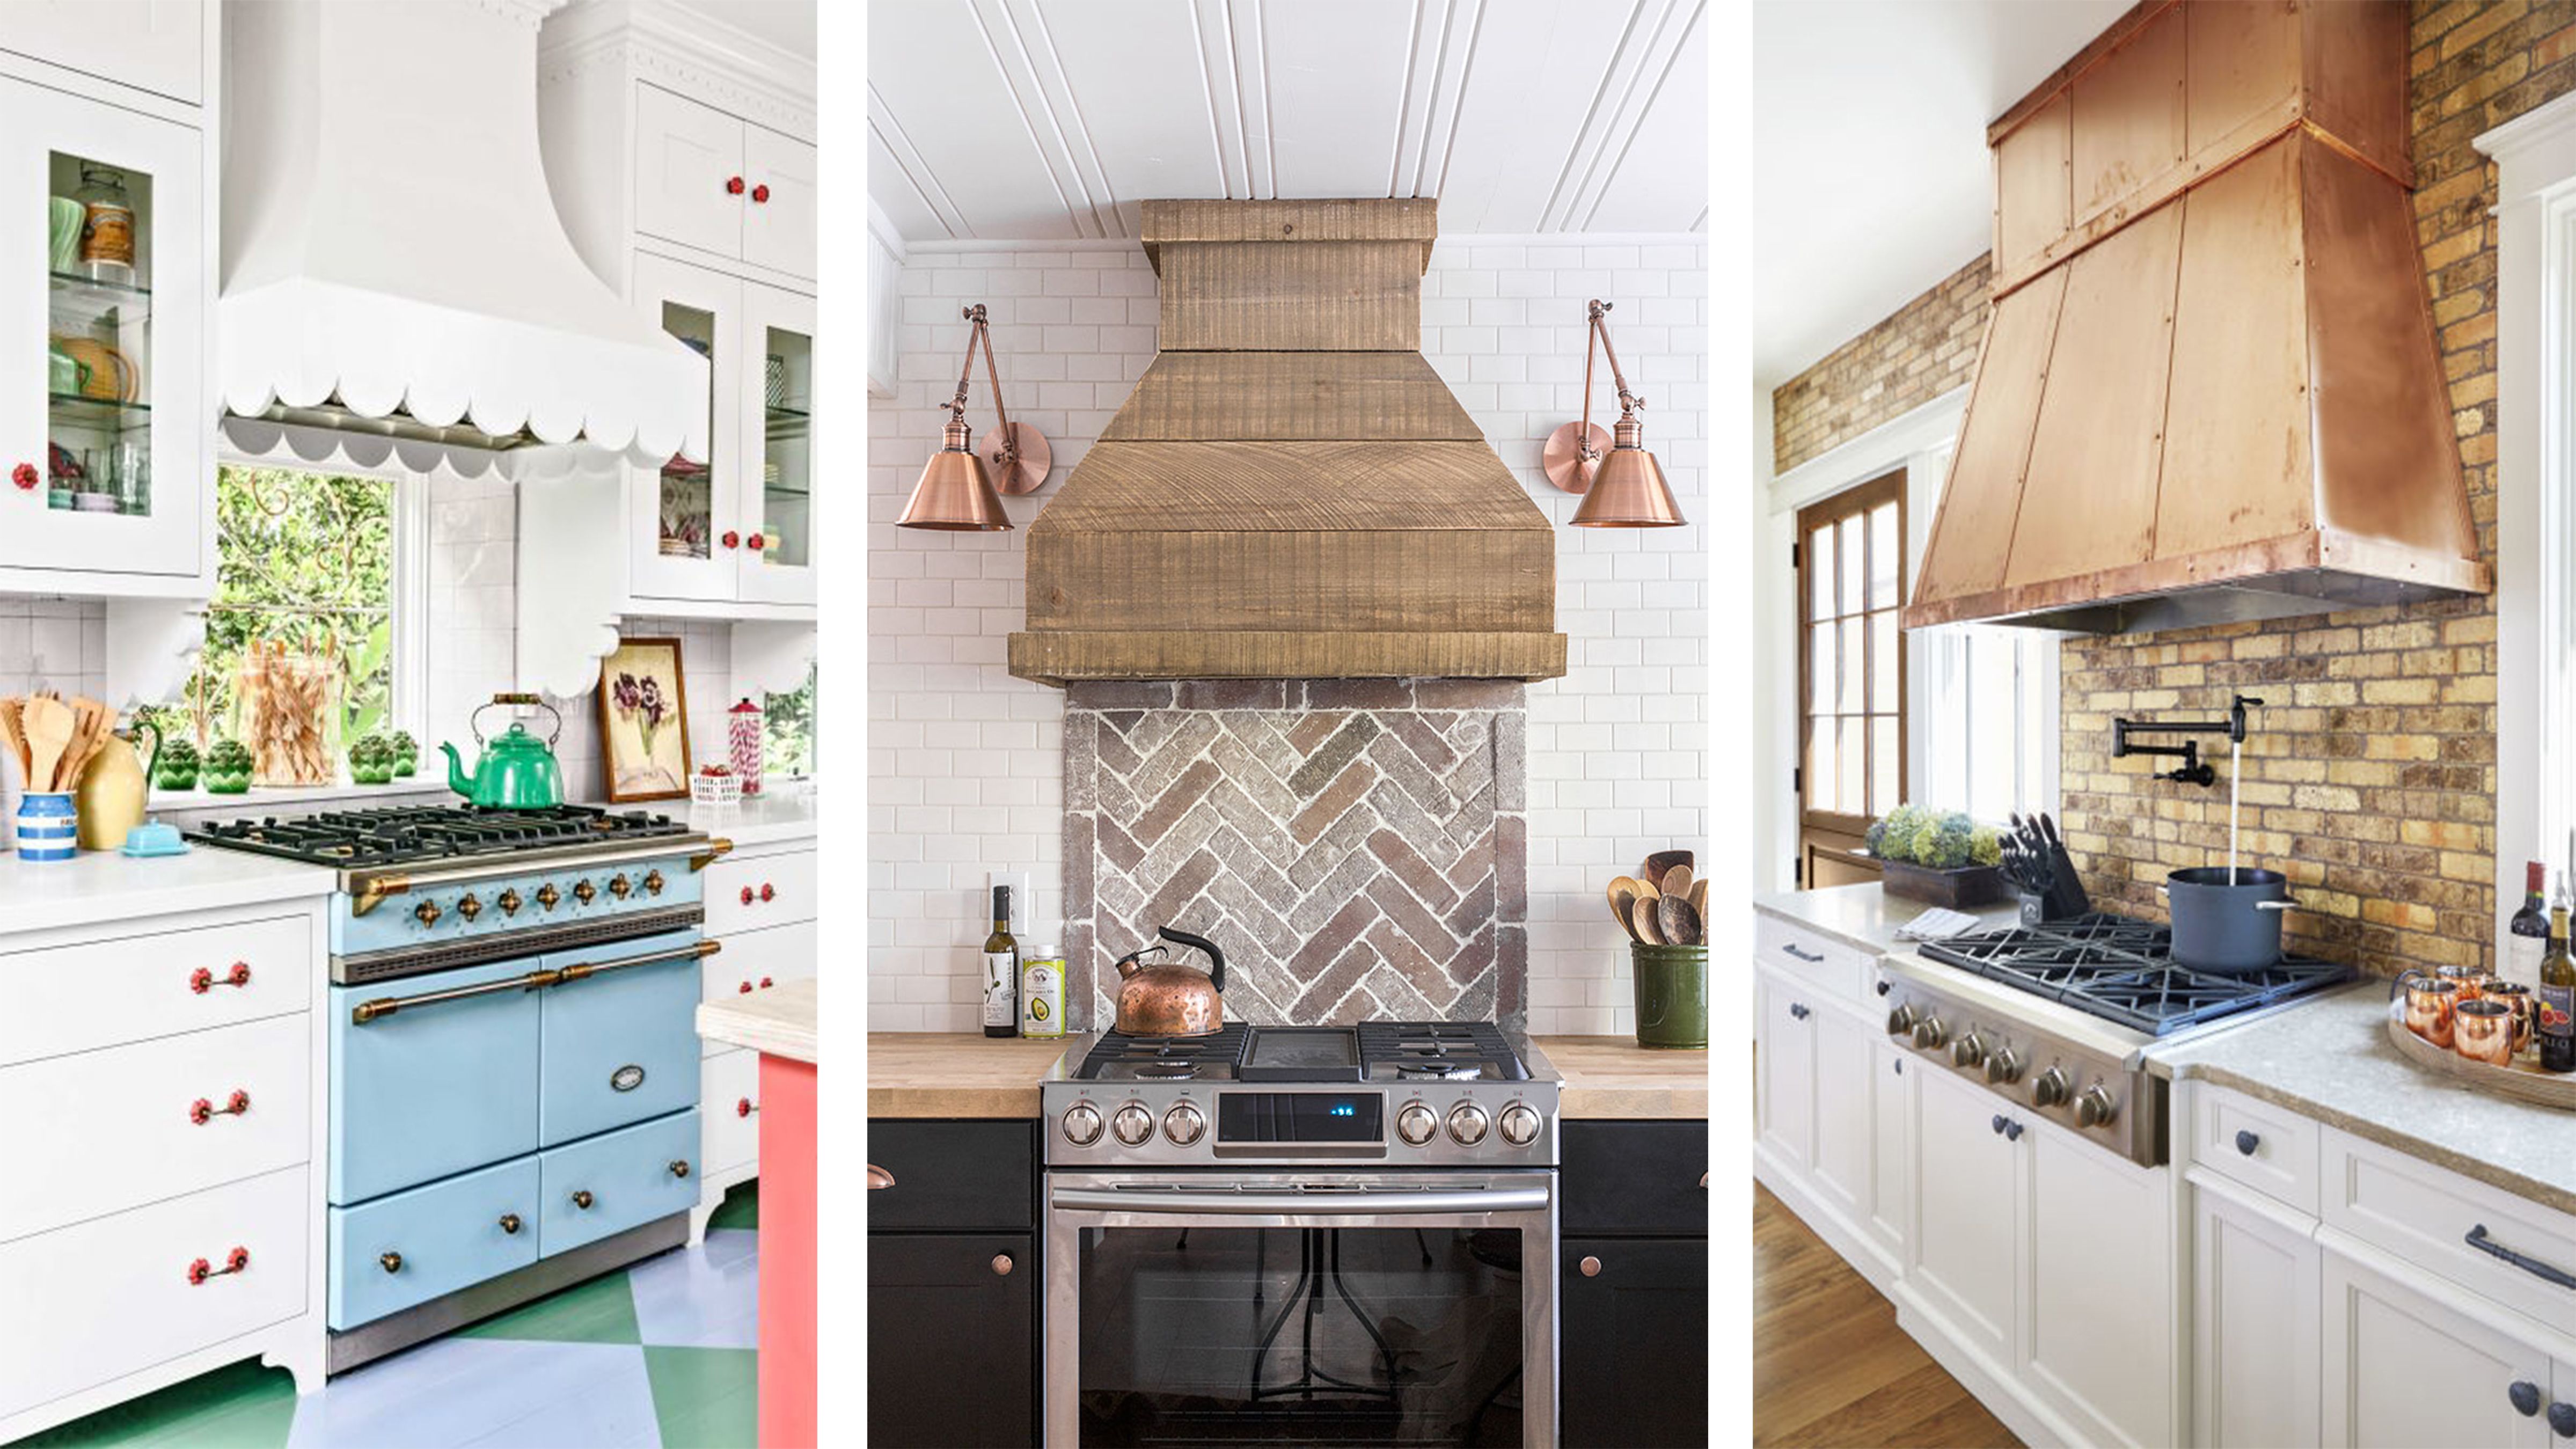 15 Gorgeous Kitchen Range That Are Eye Candy (Not Eyesores) - The Most Beautiful Kitchen Hoods We've Ever Seen